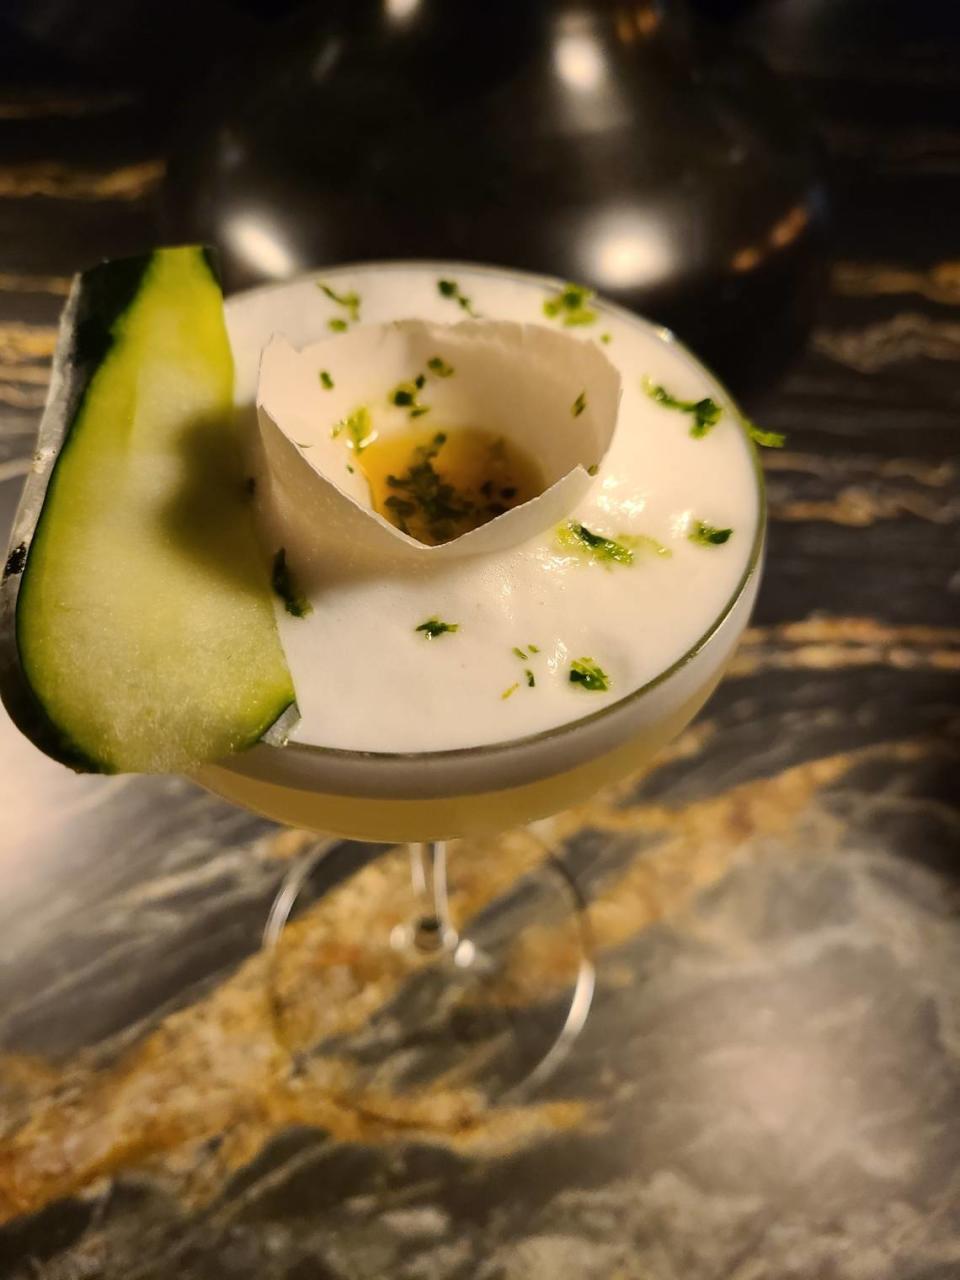 The Glass House cocktail from Trifecta Glass Art Lounge is a cucumber-flavored vodka, garnished with celery bitters and a half broken eggshell to make it look like egg yolk. Photo provided